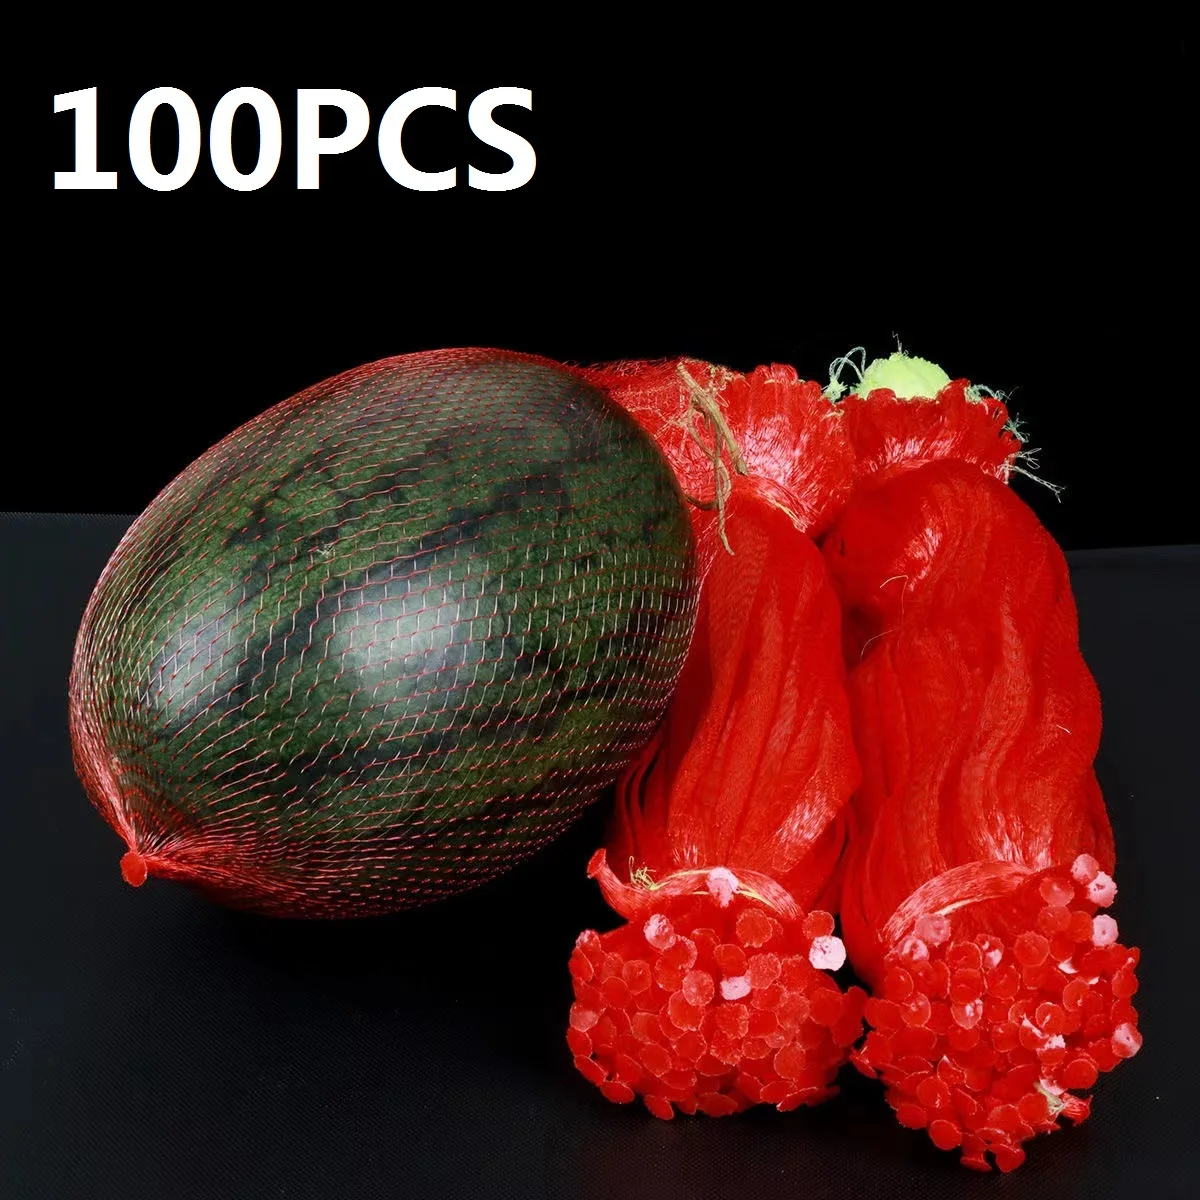 100PCS Watermelon Grow Net Bags Reusable Cantaloupes Mesh Thicken Cucumbers Growing Supporting Storage Net Bags for Vegetable